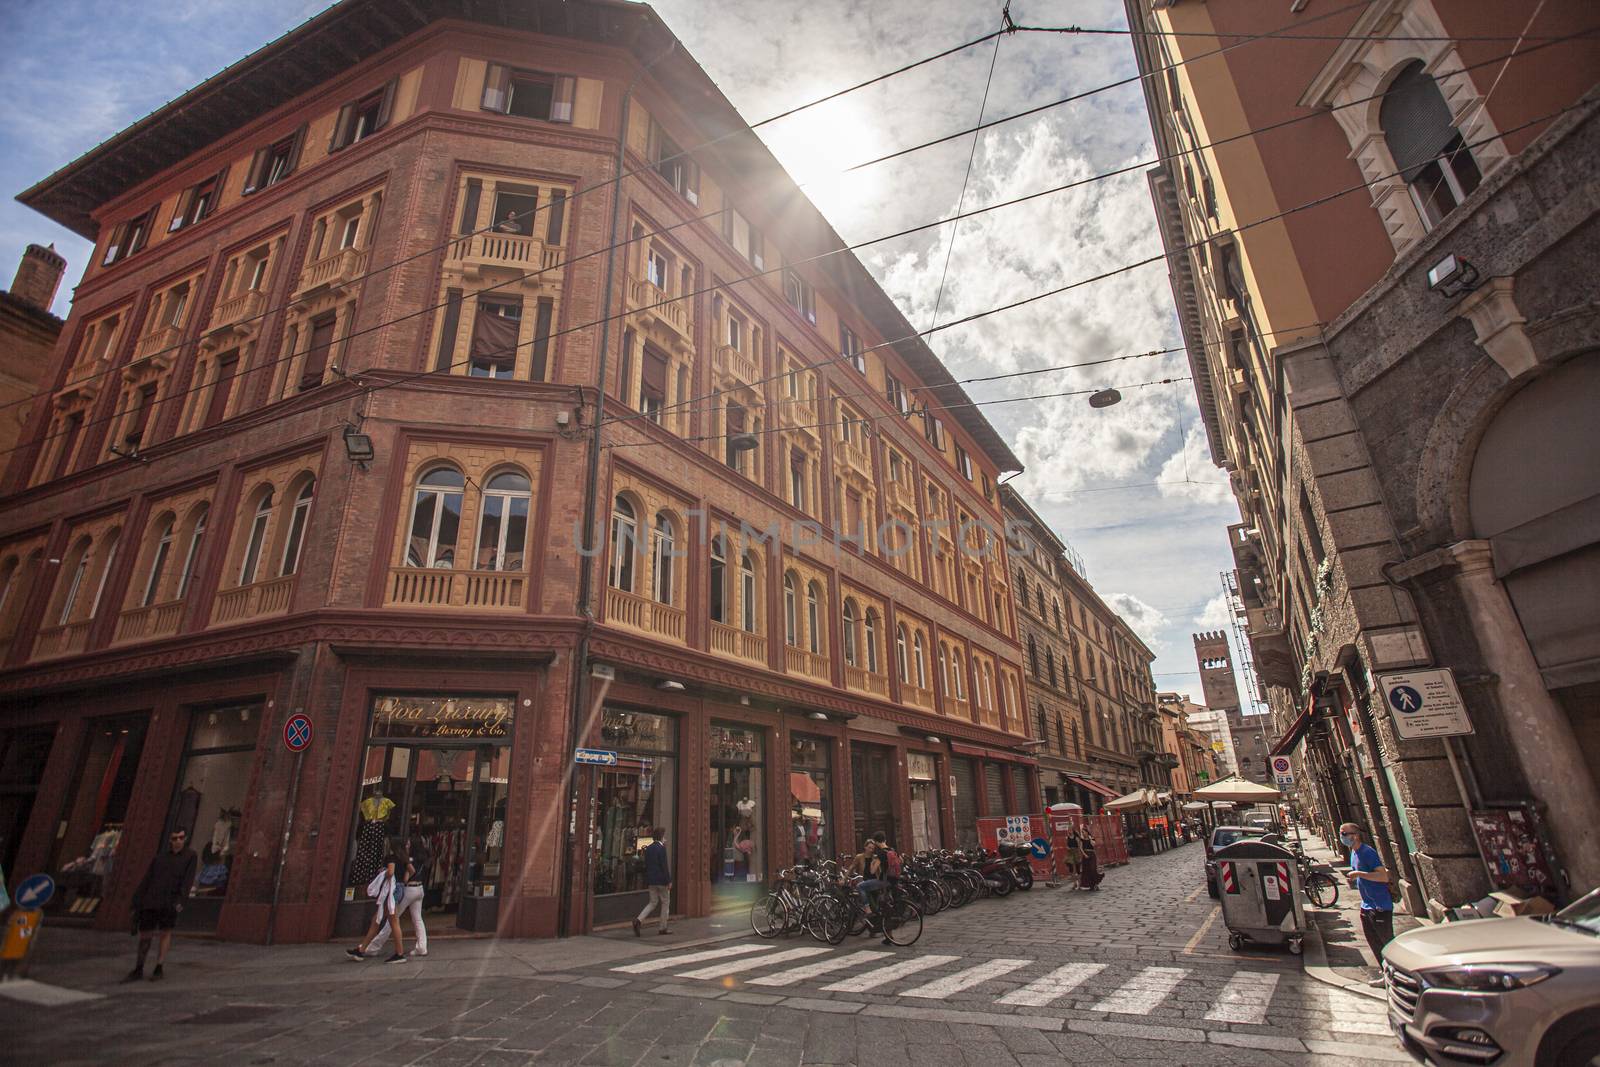 Historic building in Bologna a famous Italian city by pippocarlot